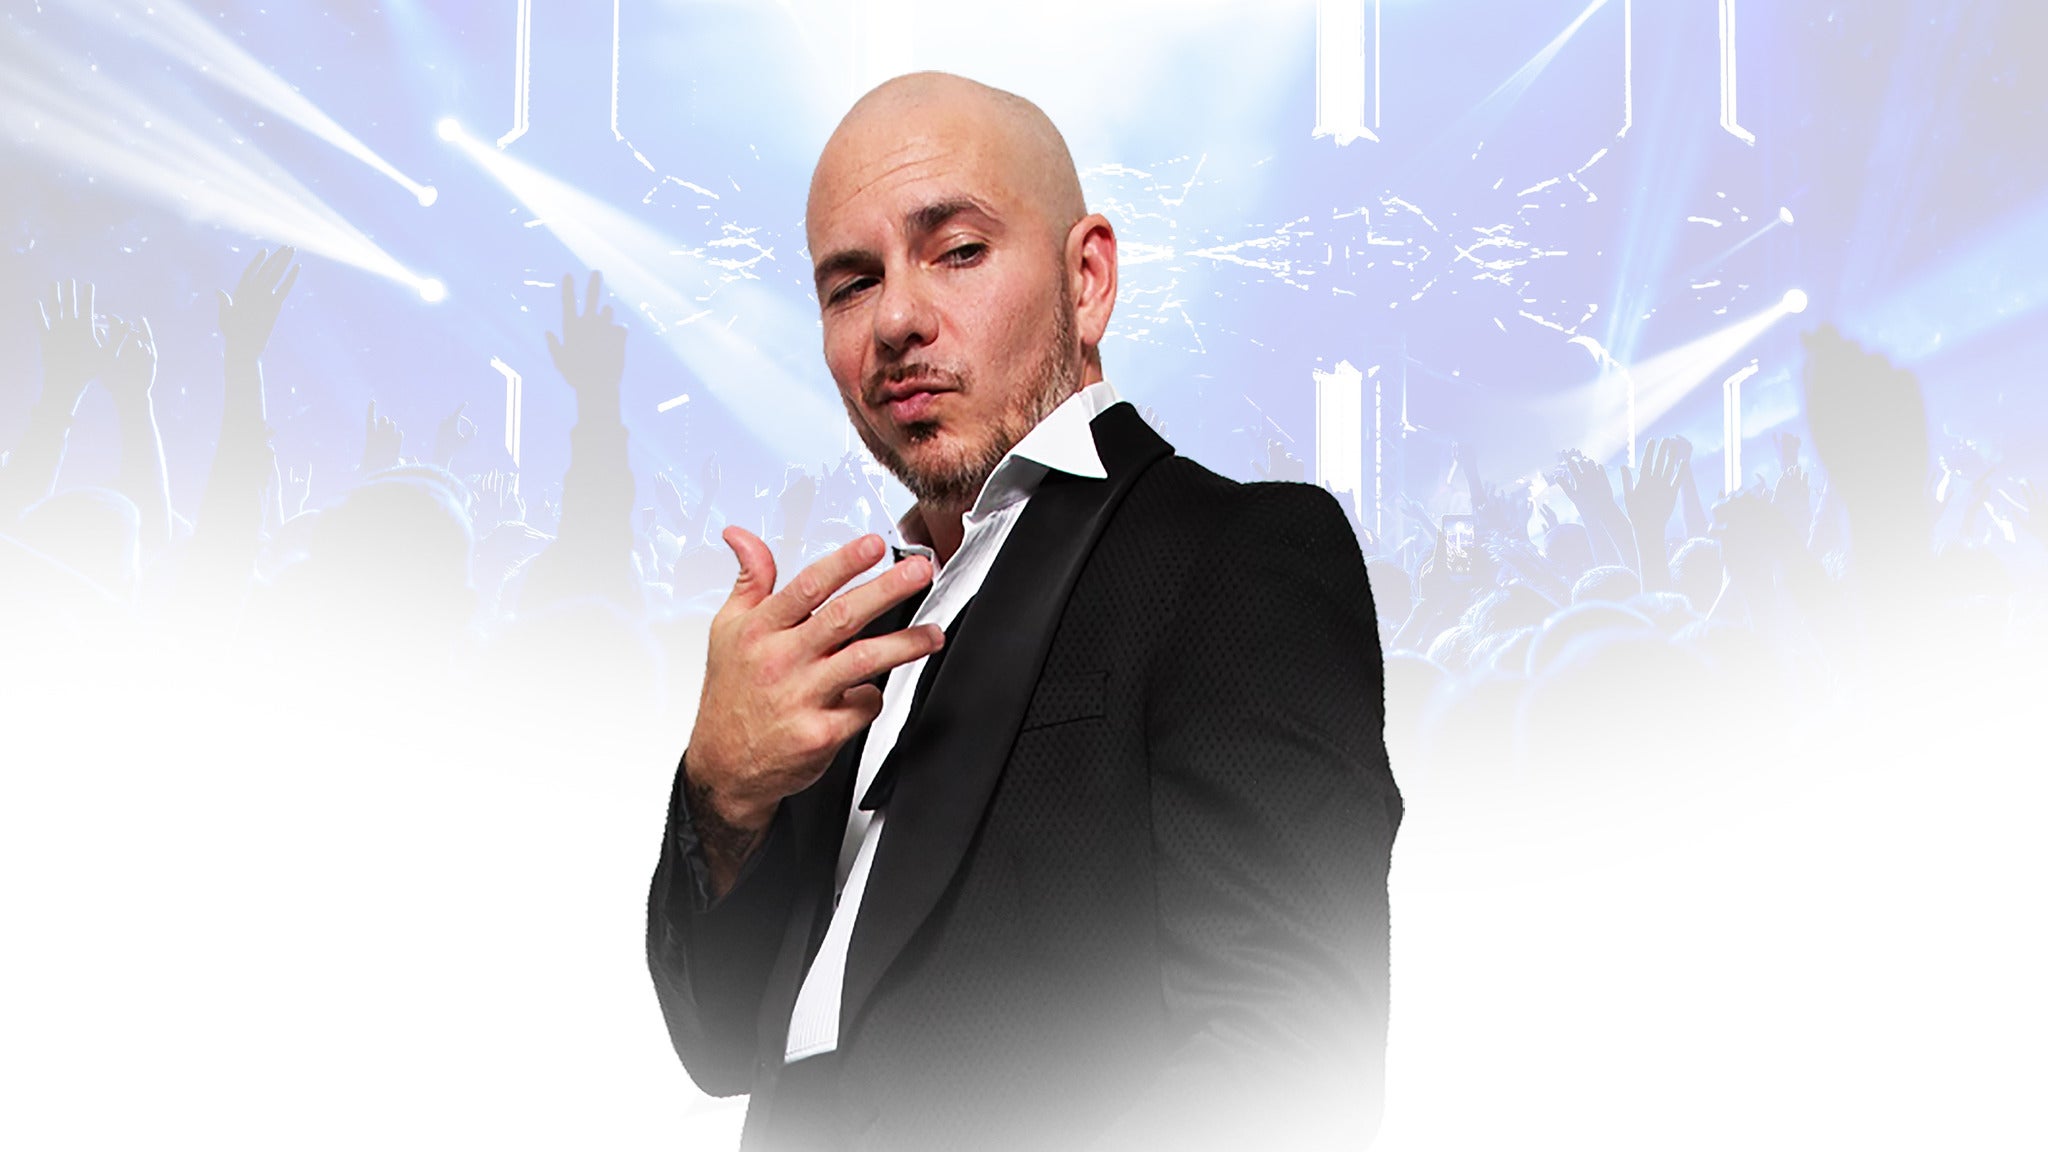 Pitbull: I Feel Good Tour in Mountain View promo photo for VIP Package presale offer code